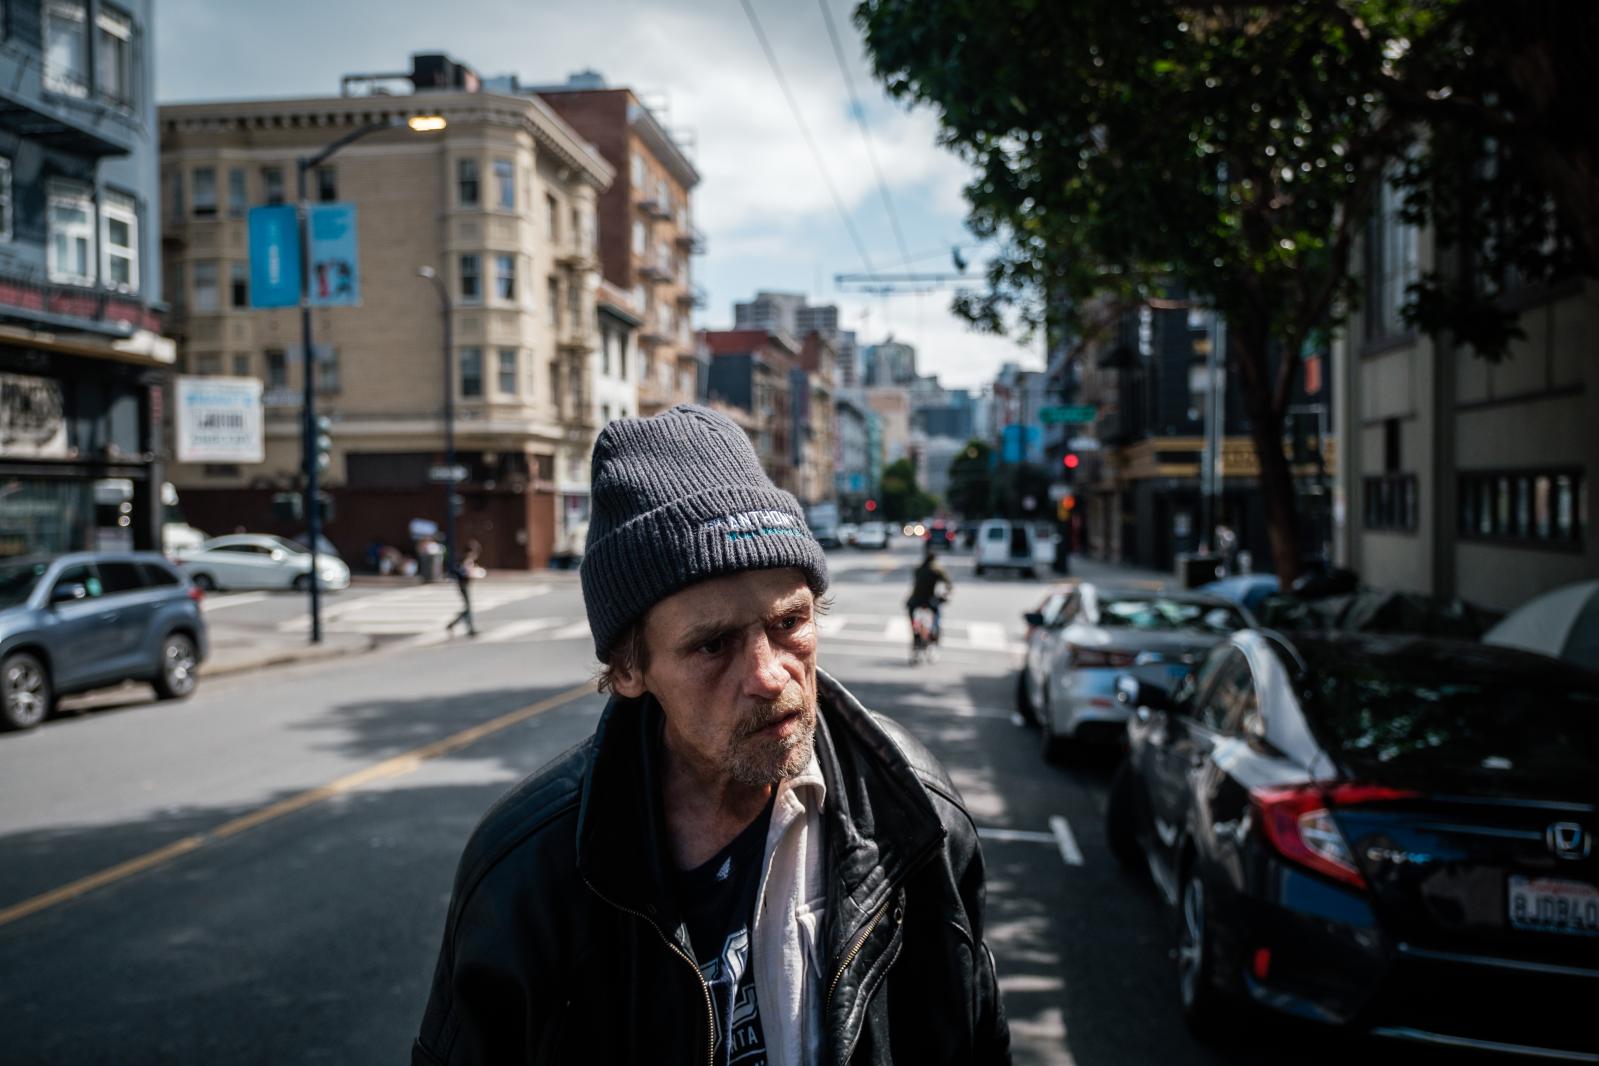 Image from San Francisco's Housing Crisis - Jeff Reaves, a homeless man, pauses on the street while...